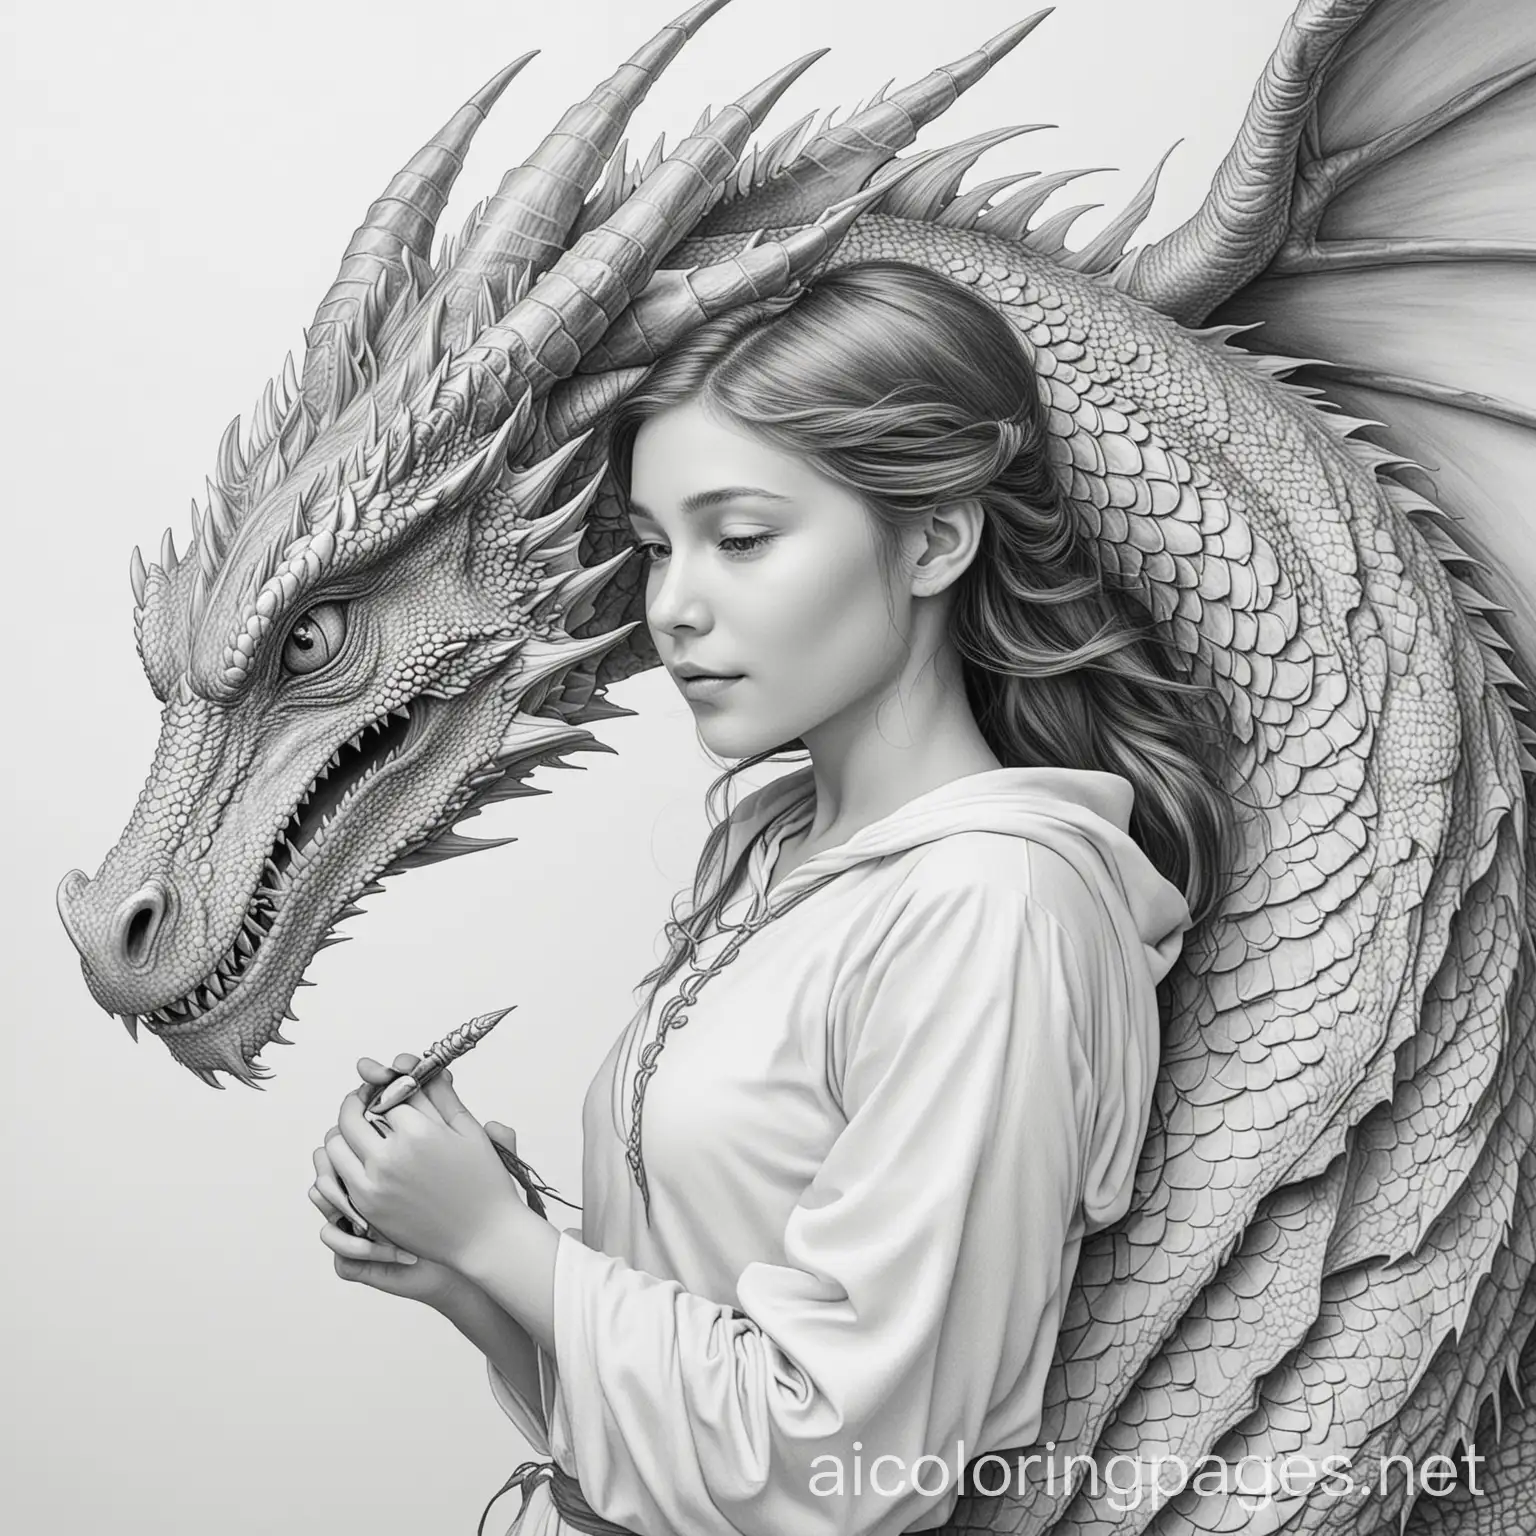 Dragon with girl, Coloring Page, black and white, line art, white background, Simplicity, Ample White Space. The background of the coloring page is plain white to make it easy for young children to color within the lines. The outlines of all the subjects are easy to distinguish, making it simple for kids to color without too much difficulty